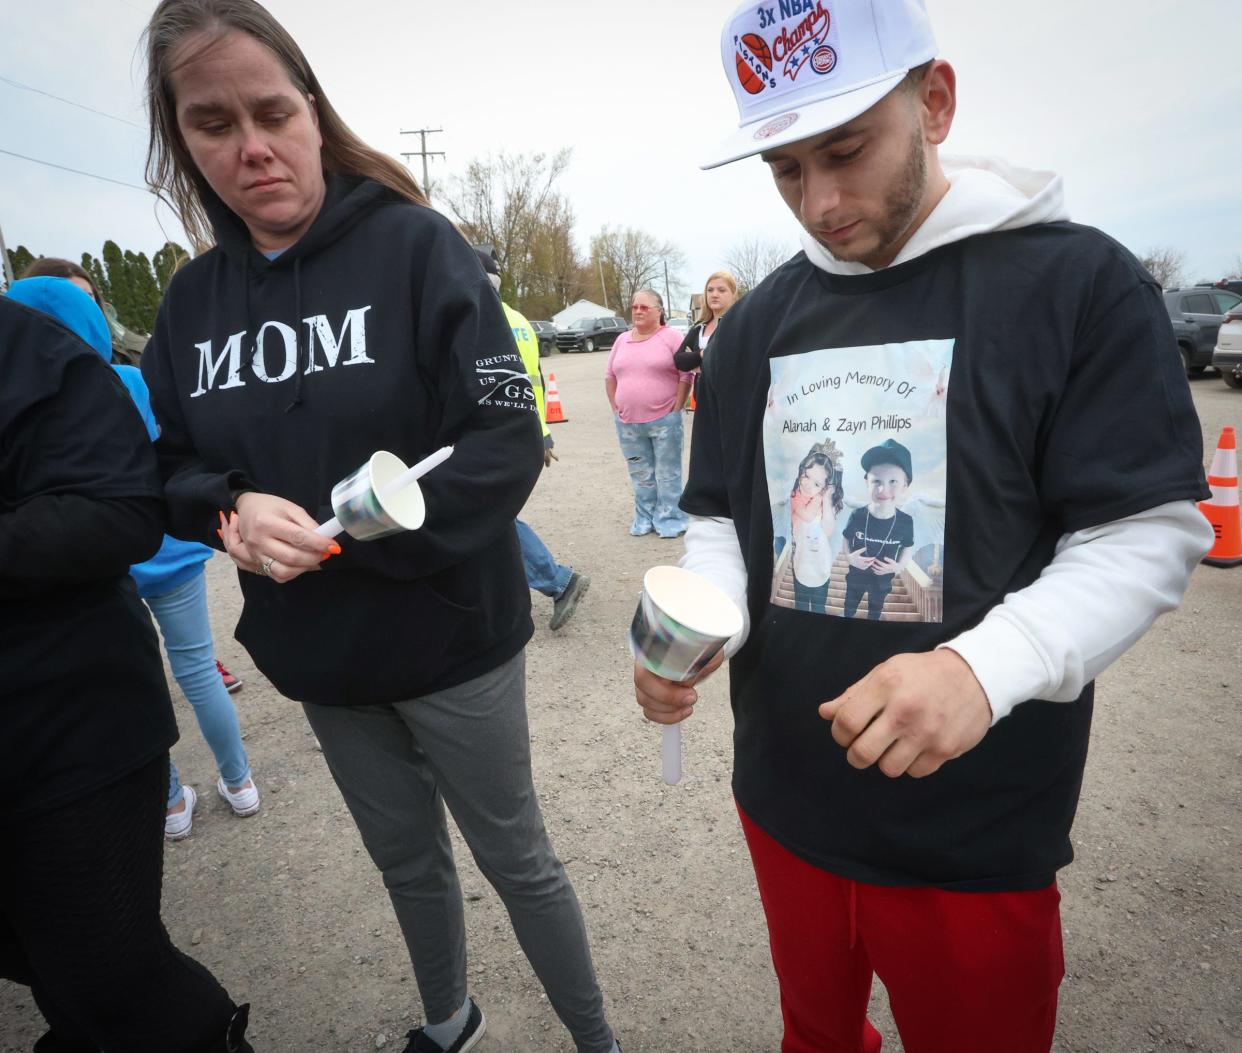 Missy Kowalczyk (left) and Brent Green, attempt to light candles at a vigil held for Alayna and Zayn Phillips at the Swan Boat Club ceremony on Friday, April 26, 2024 in Newport. The high winds off Lake Erie kept the candles from igniting.